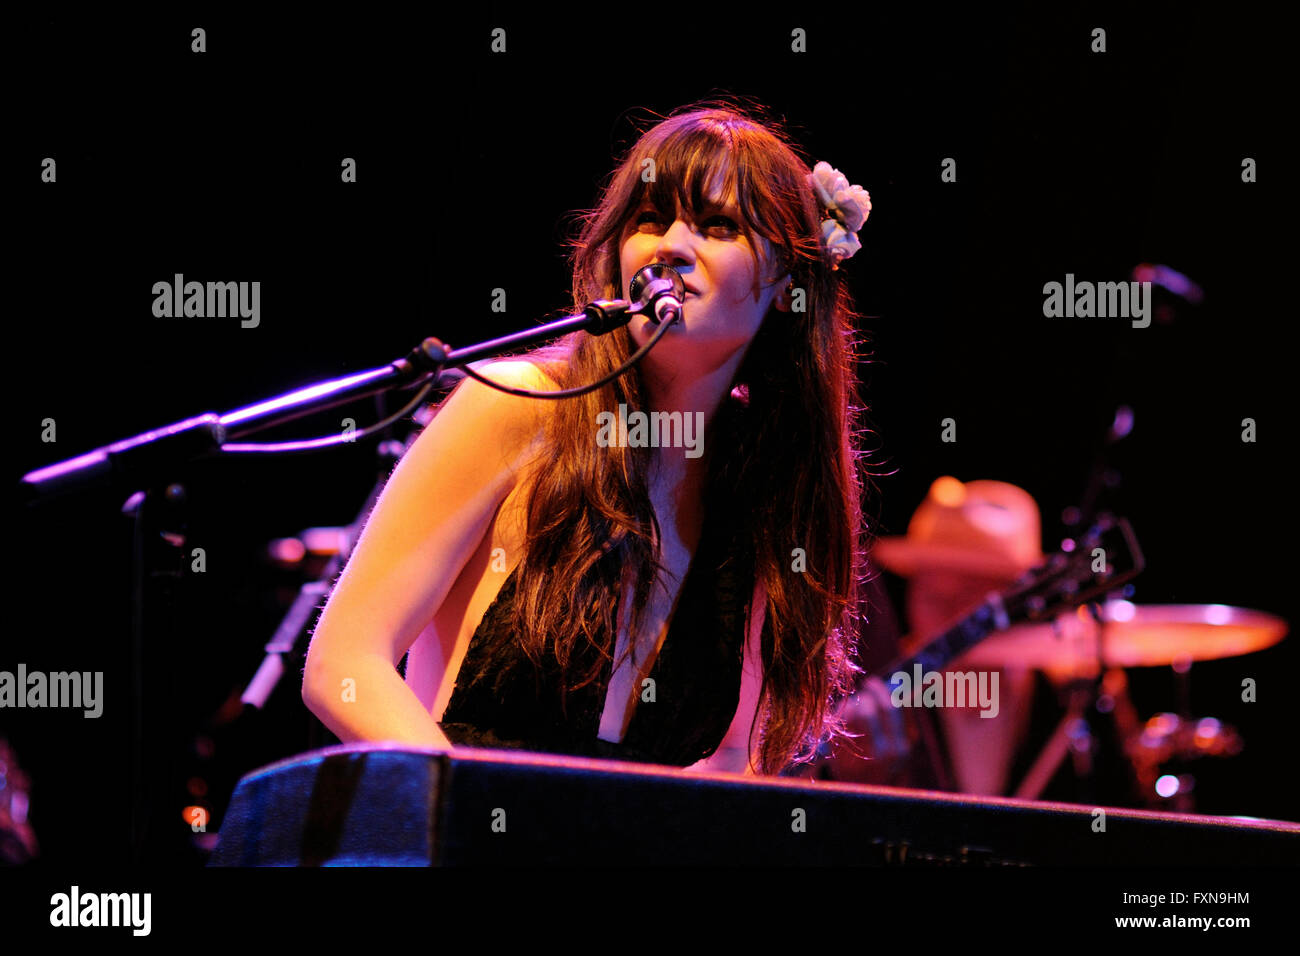 BARCELONA - APR 25: Zooey Deschanel performs with her band She & Him at Apolo on April 25, 2010 in Barcelona, Spain. Stock Photo